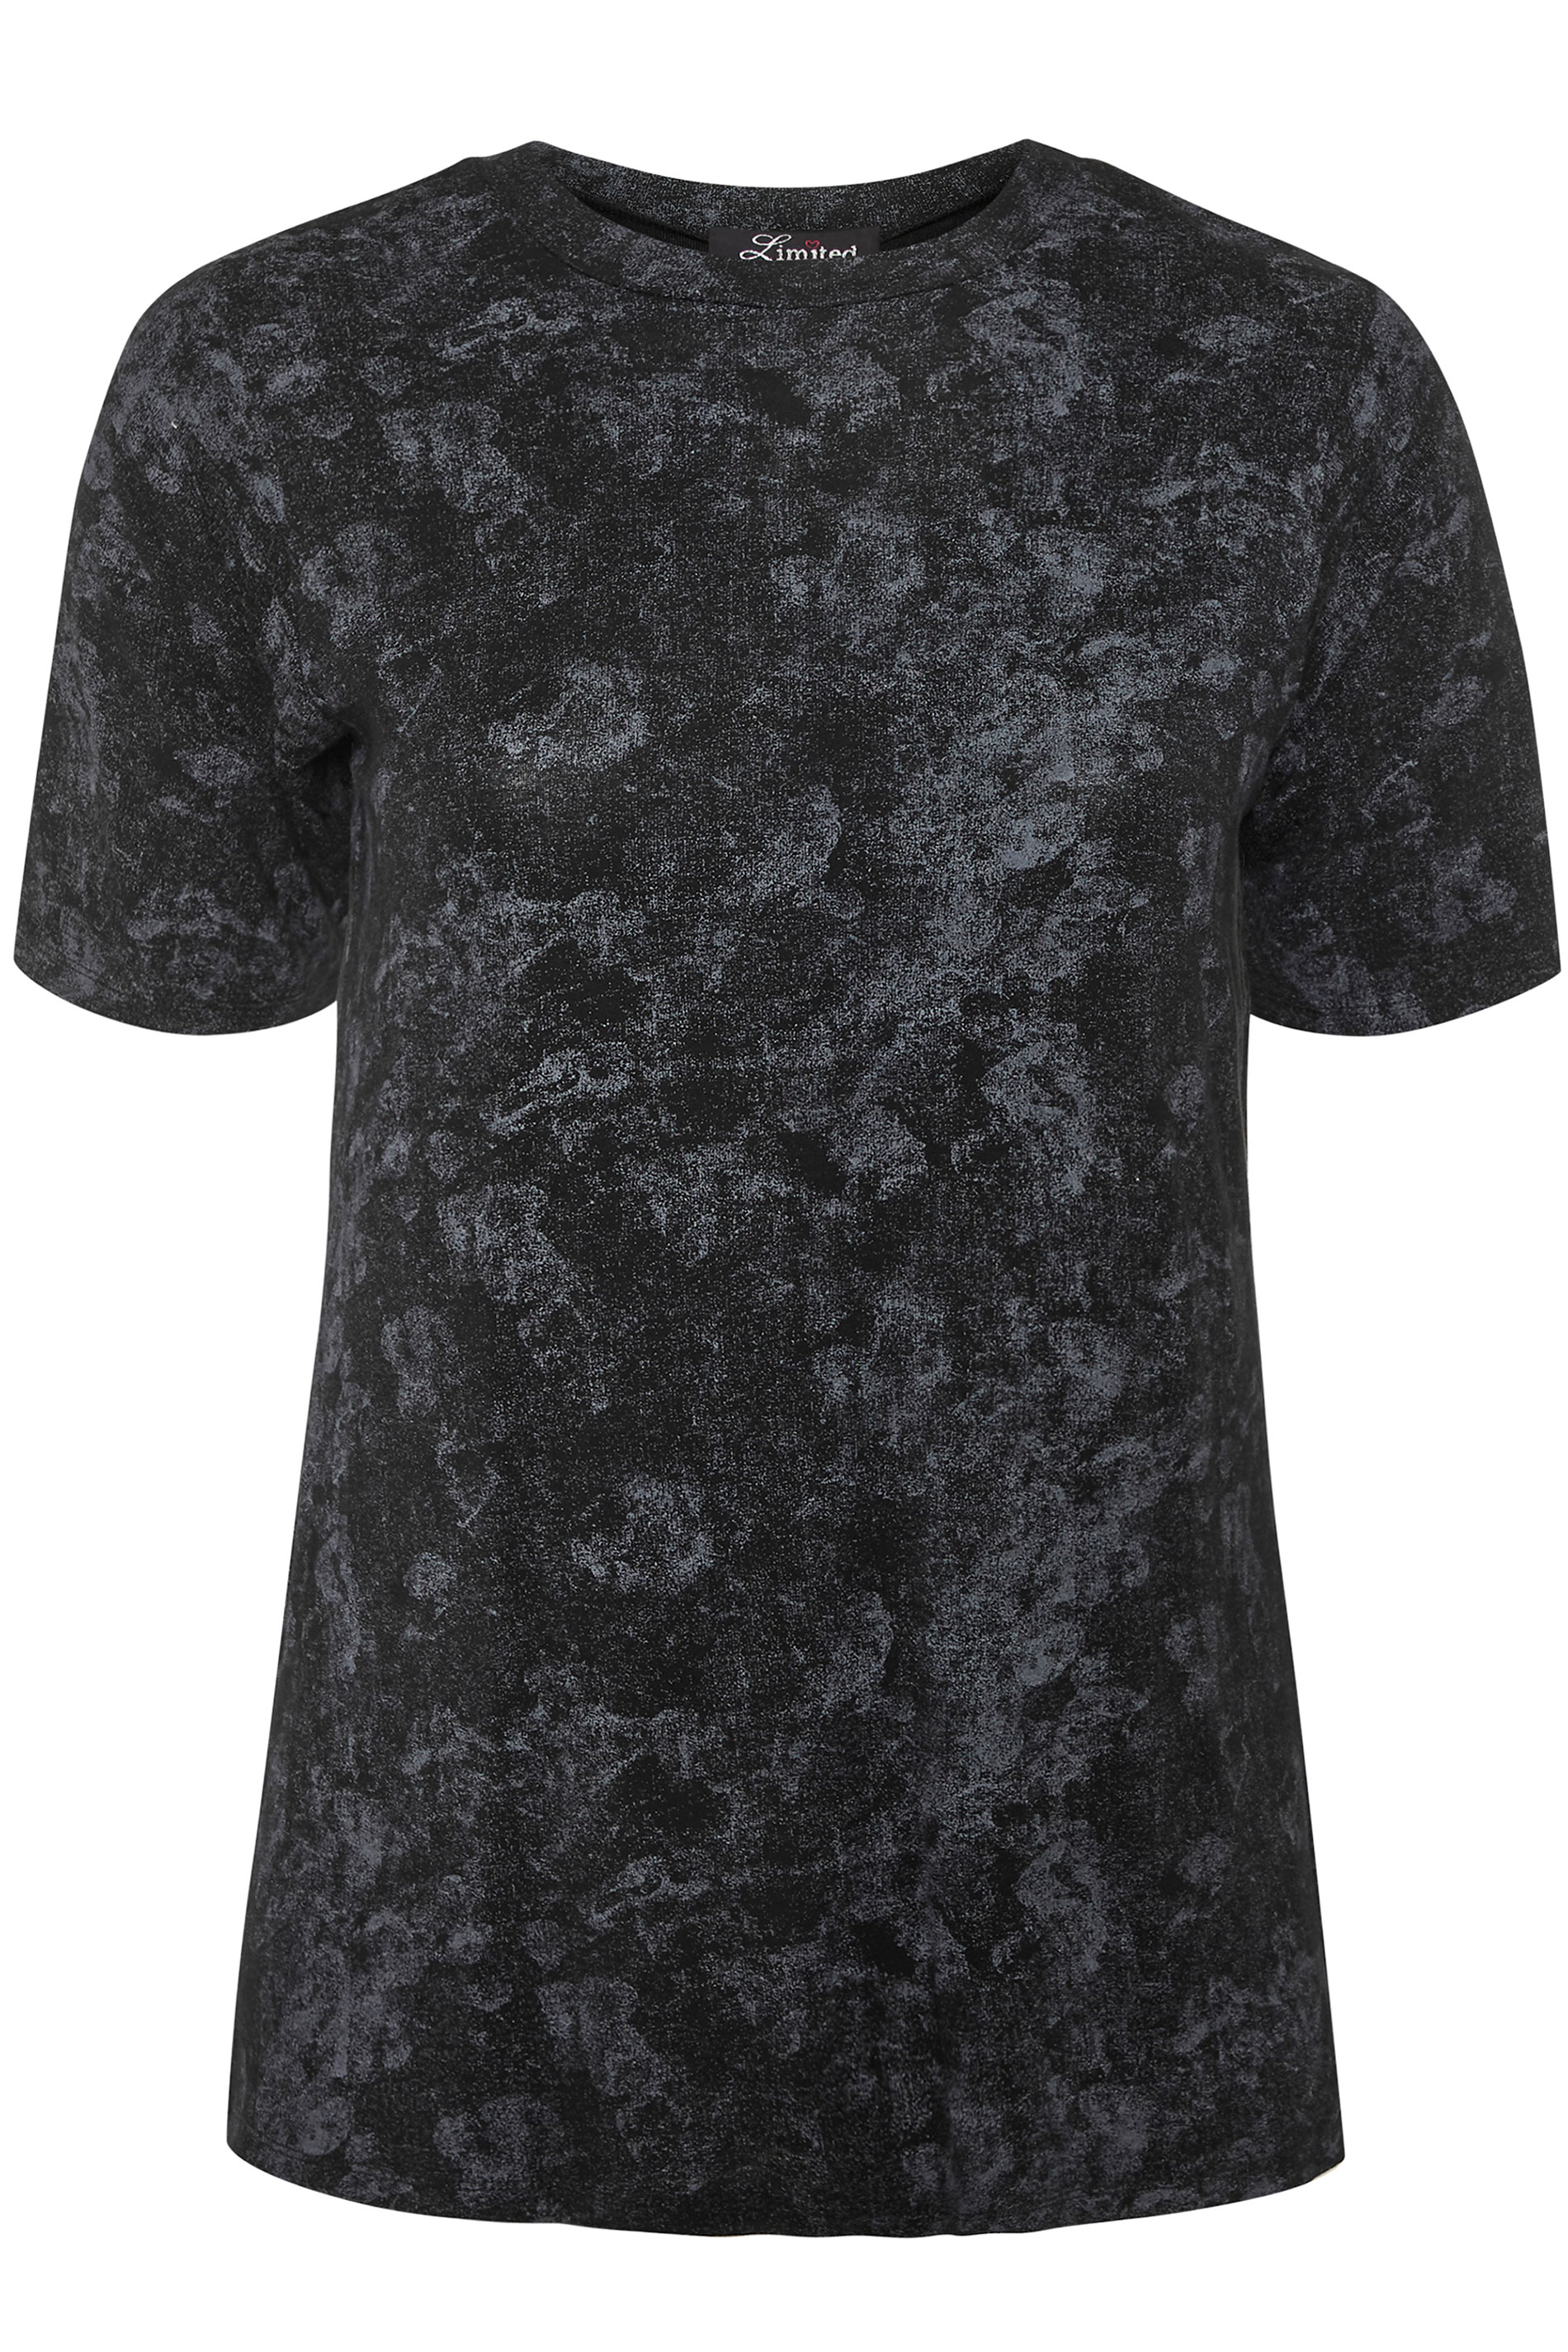 LIMITED COLLECTION Black & Grey Tie Dye T-Shirt | Yours Clothing